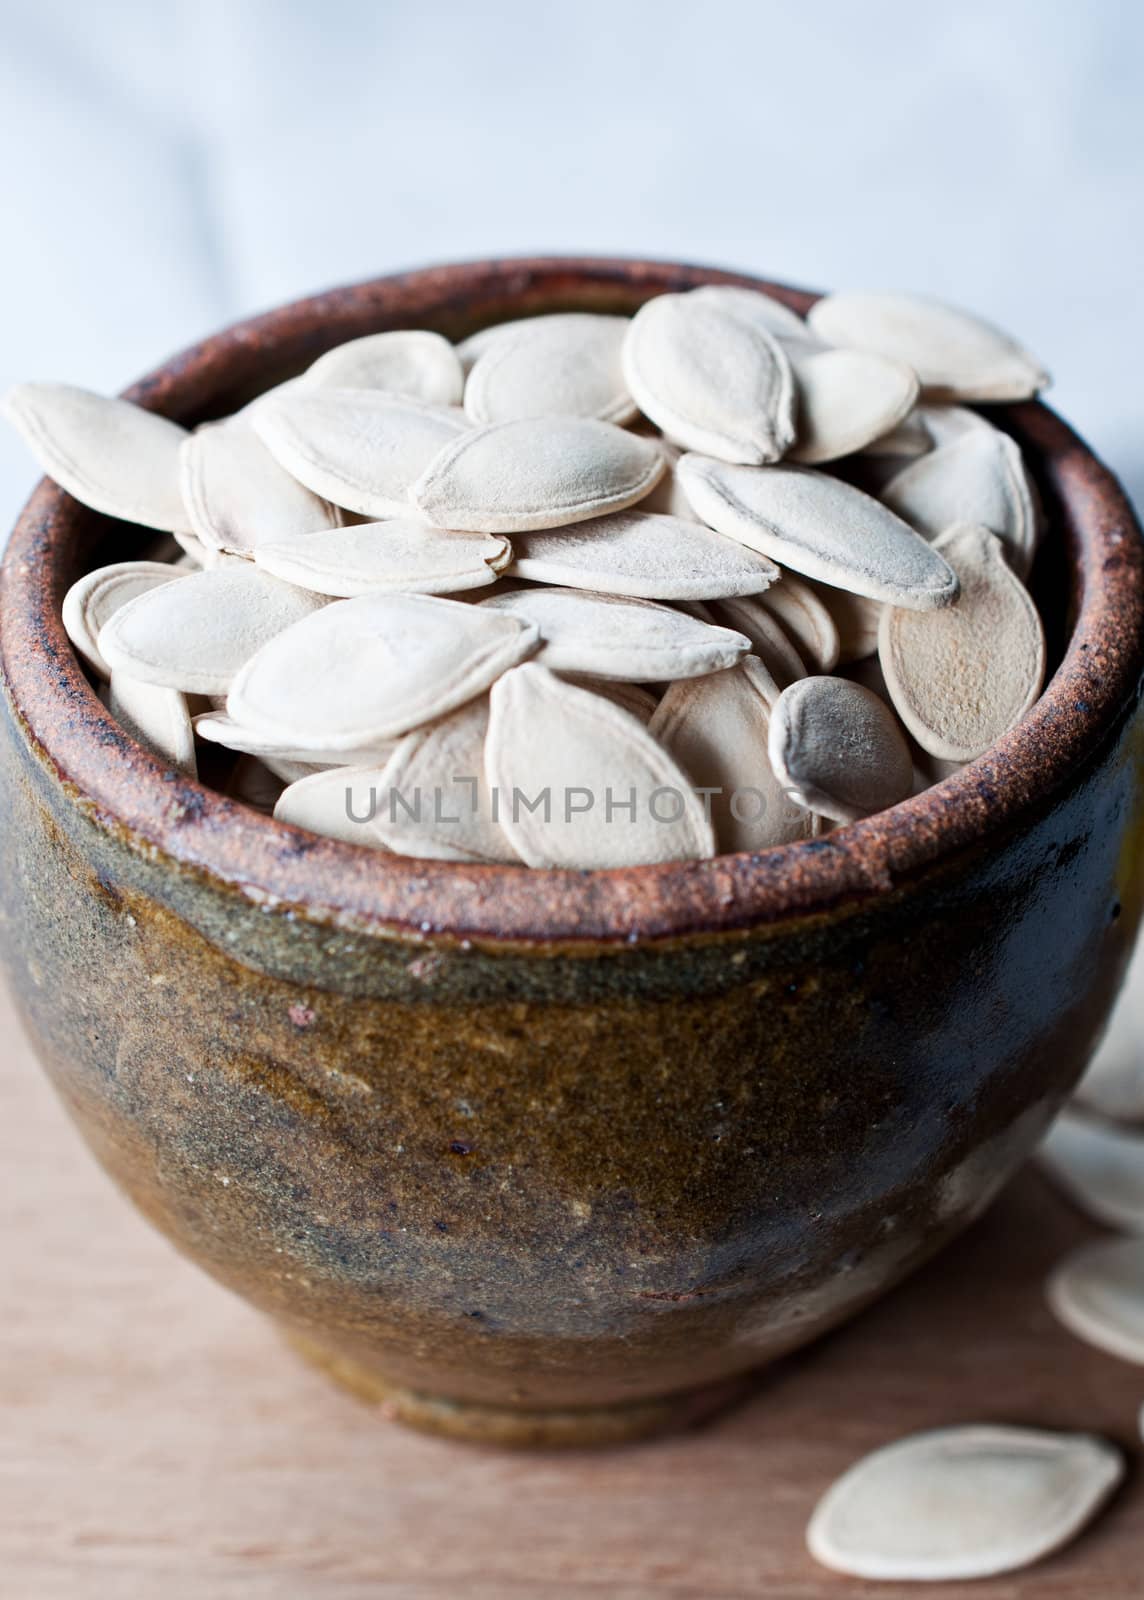 Ceramic bowl full of pumpkin seeds on kitchen table